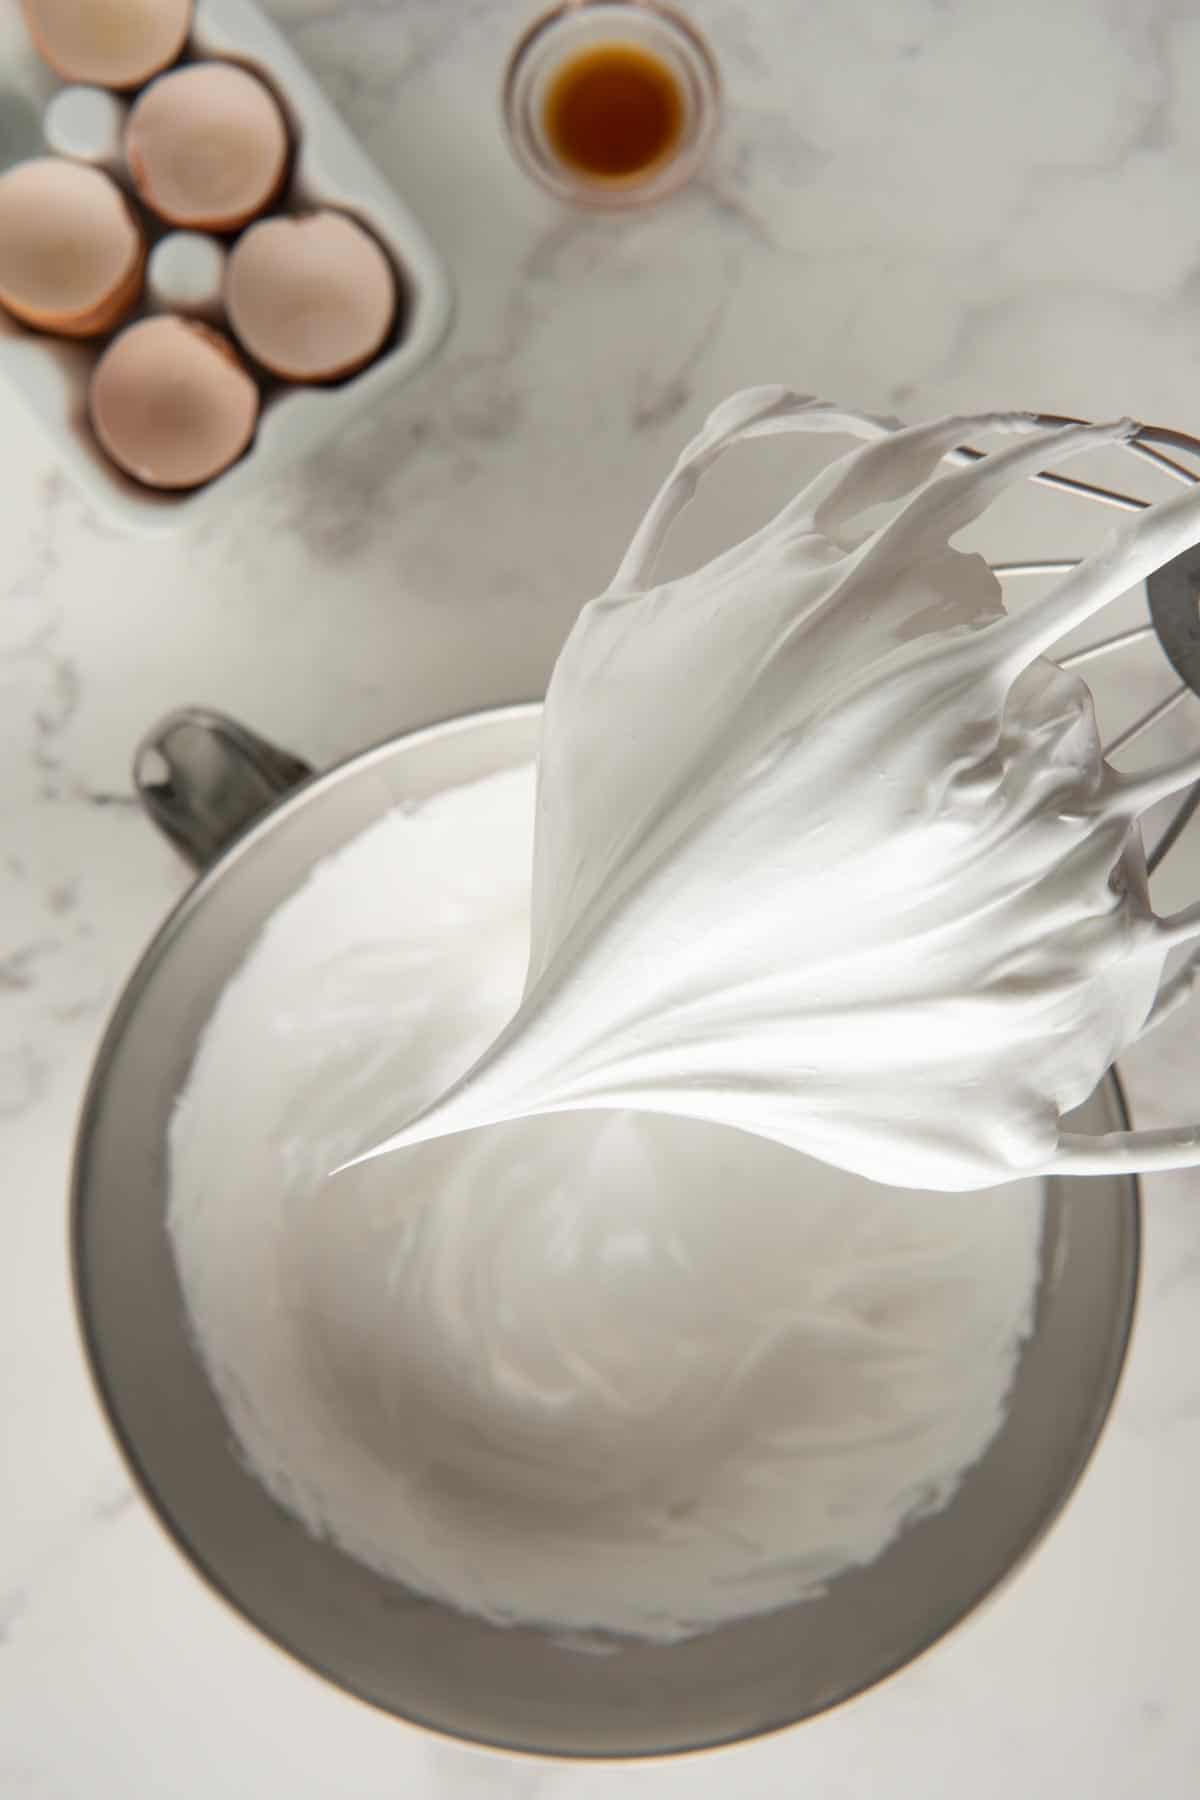 Meringue on a whisk at the stiff peaks stage above a mixing bowl.